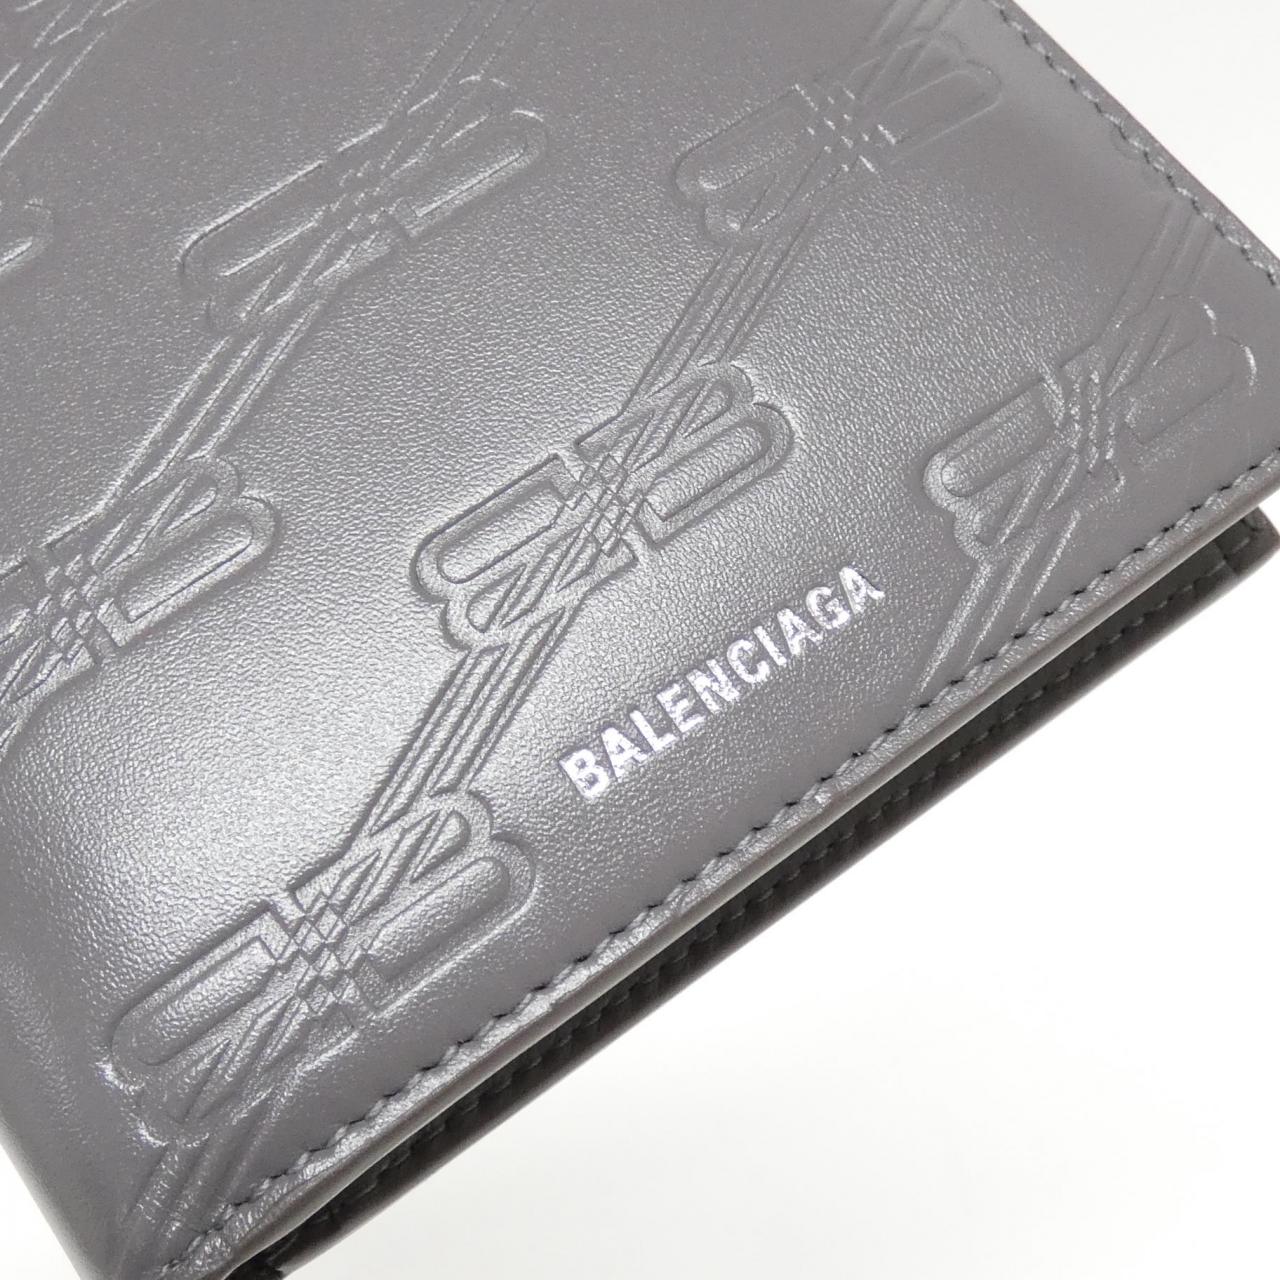 [BRAND NEW] BALENCIAGA Embossed Square Fold Coin Wallet 718395 210JS Wallet